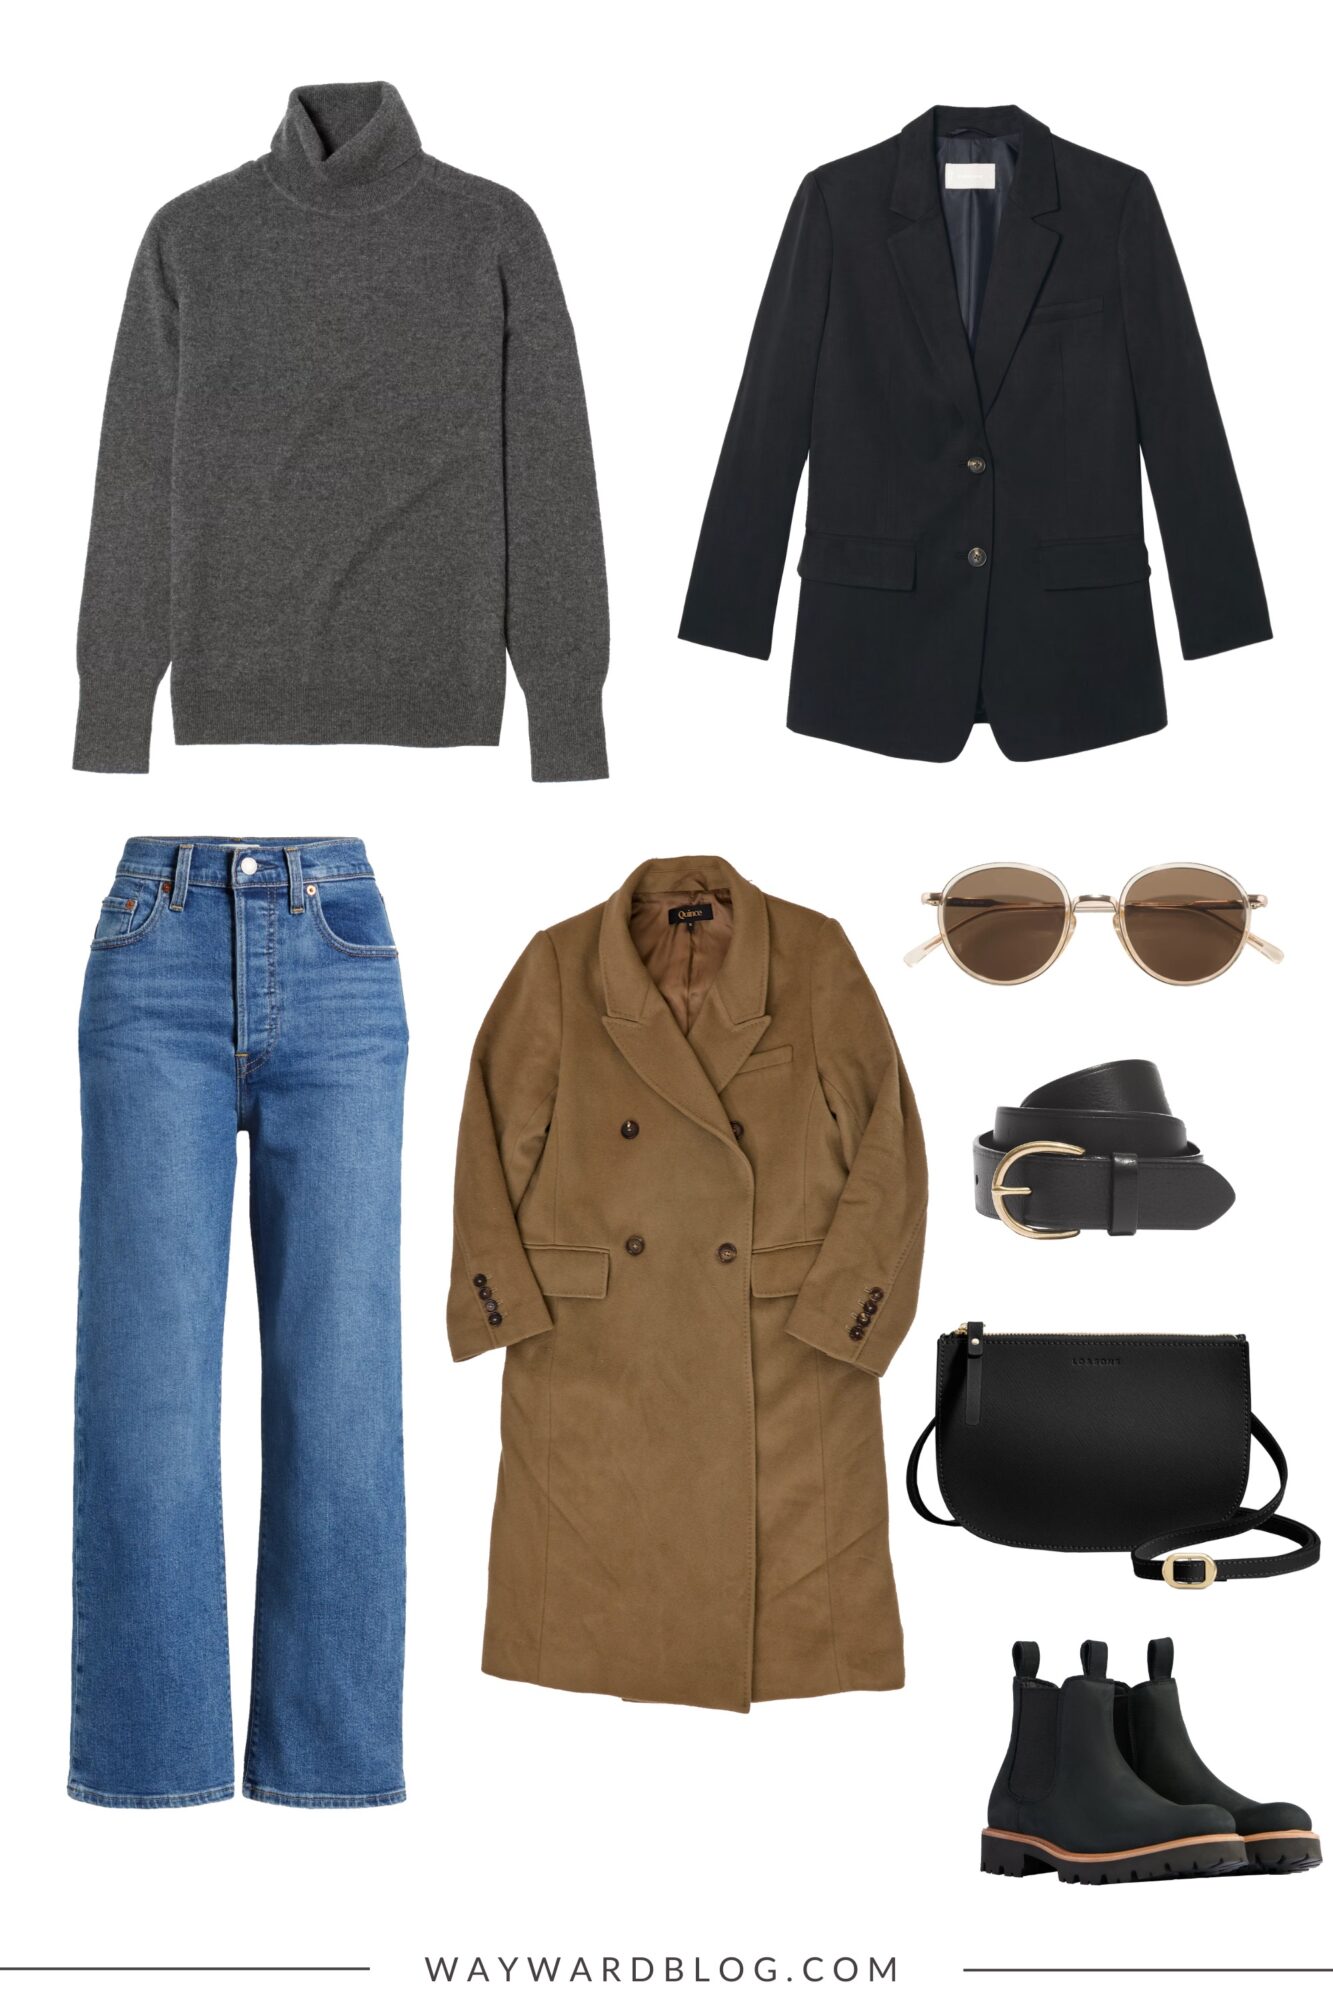 A clothing collage of everything Alyssa wore on Saturday, including a grey sweater, blue jeans, camel coat, and winter accessories